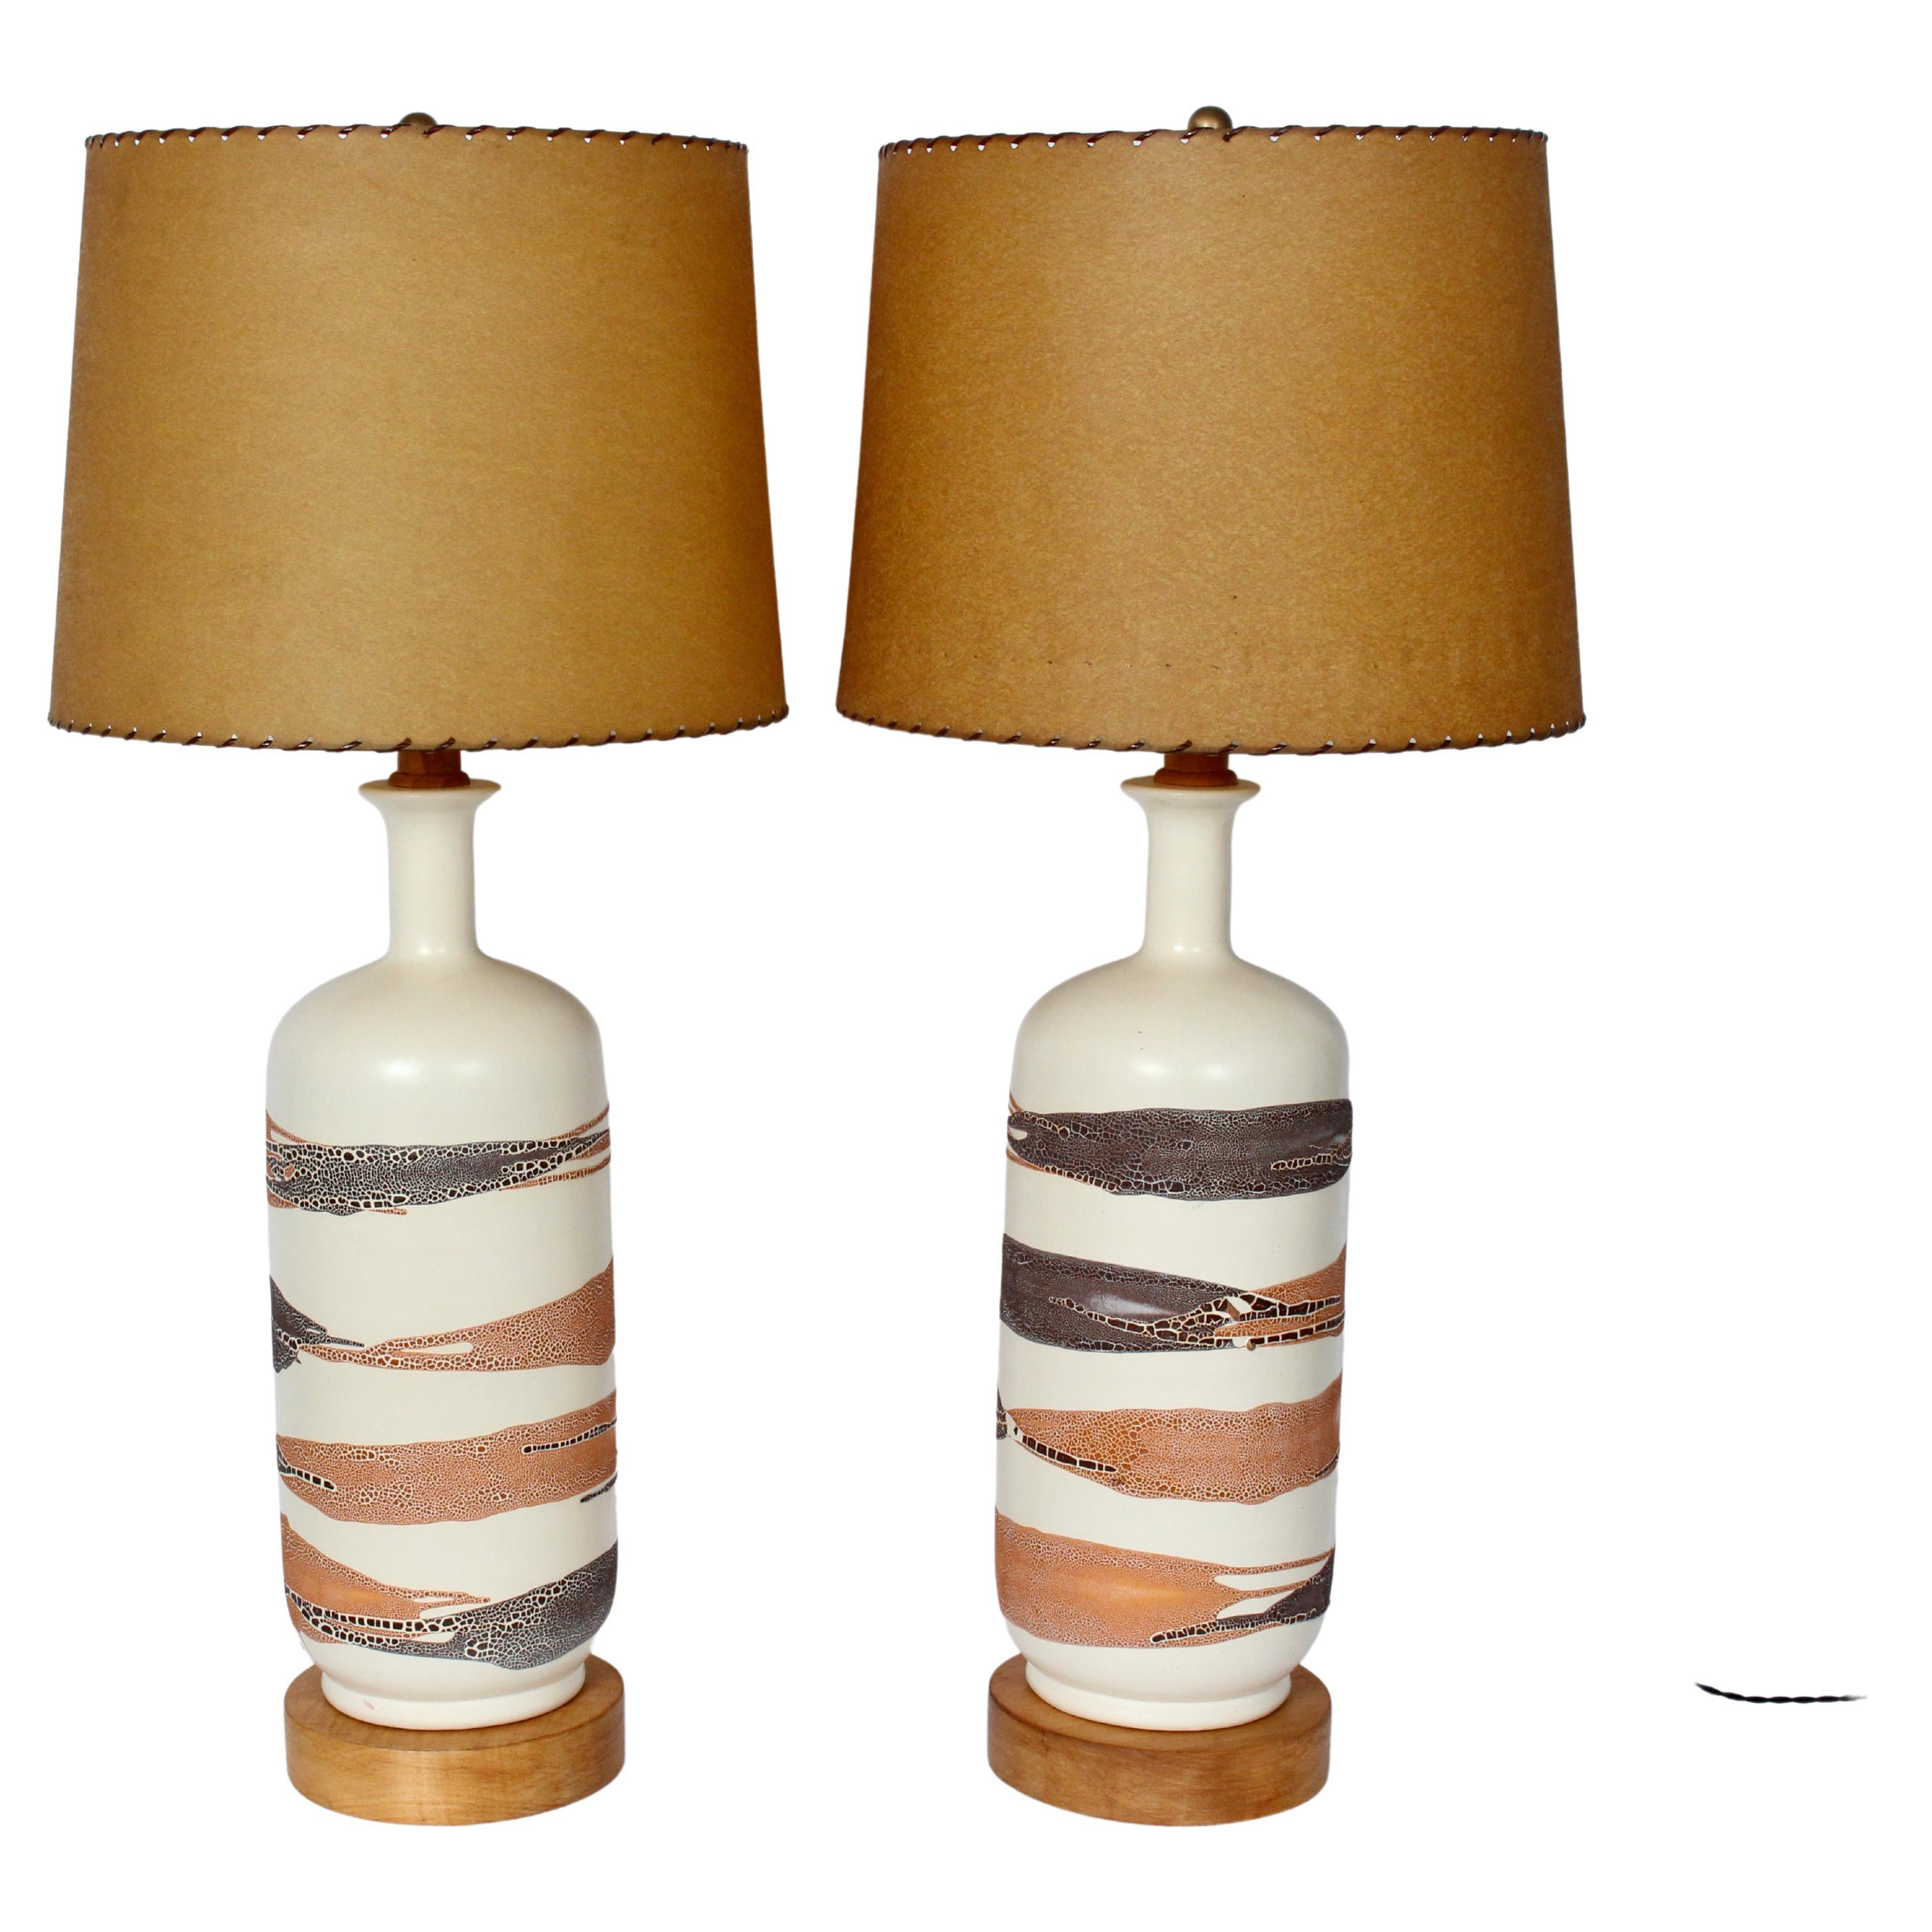 Monumental Pair of "Earth Wrap" Royal Haeger Ceramic Table Lamps, circa 1970 For Sale